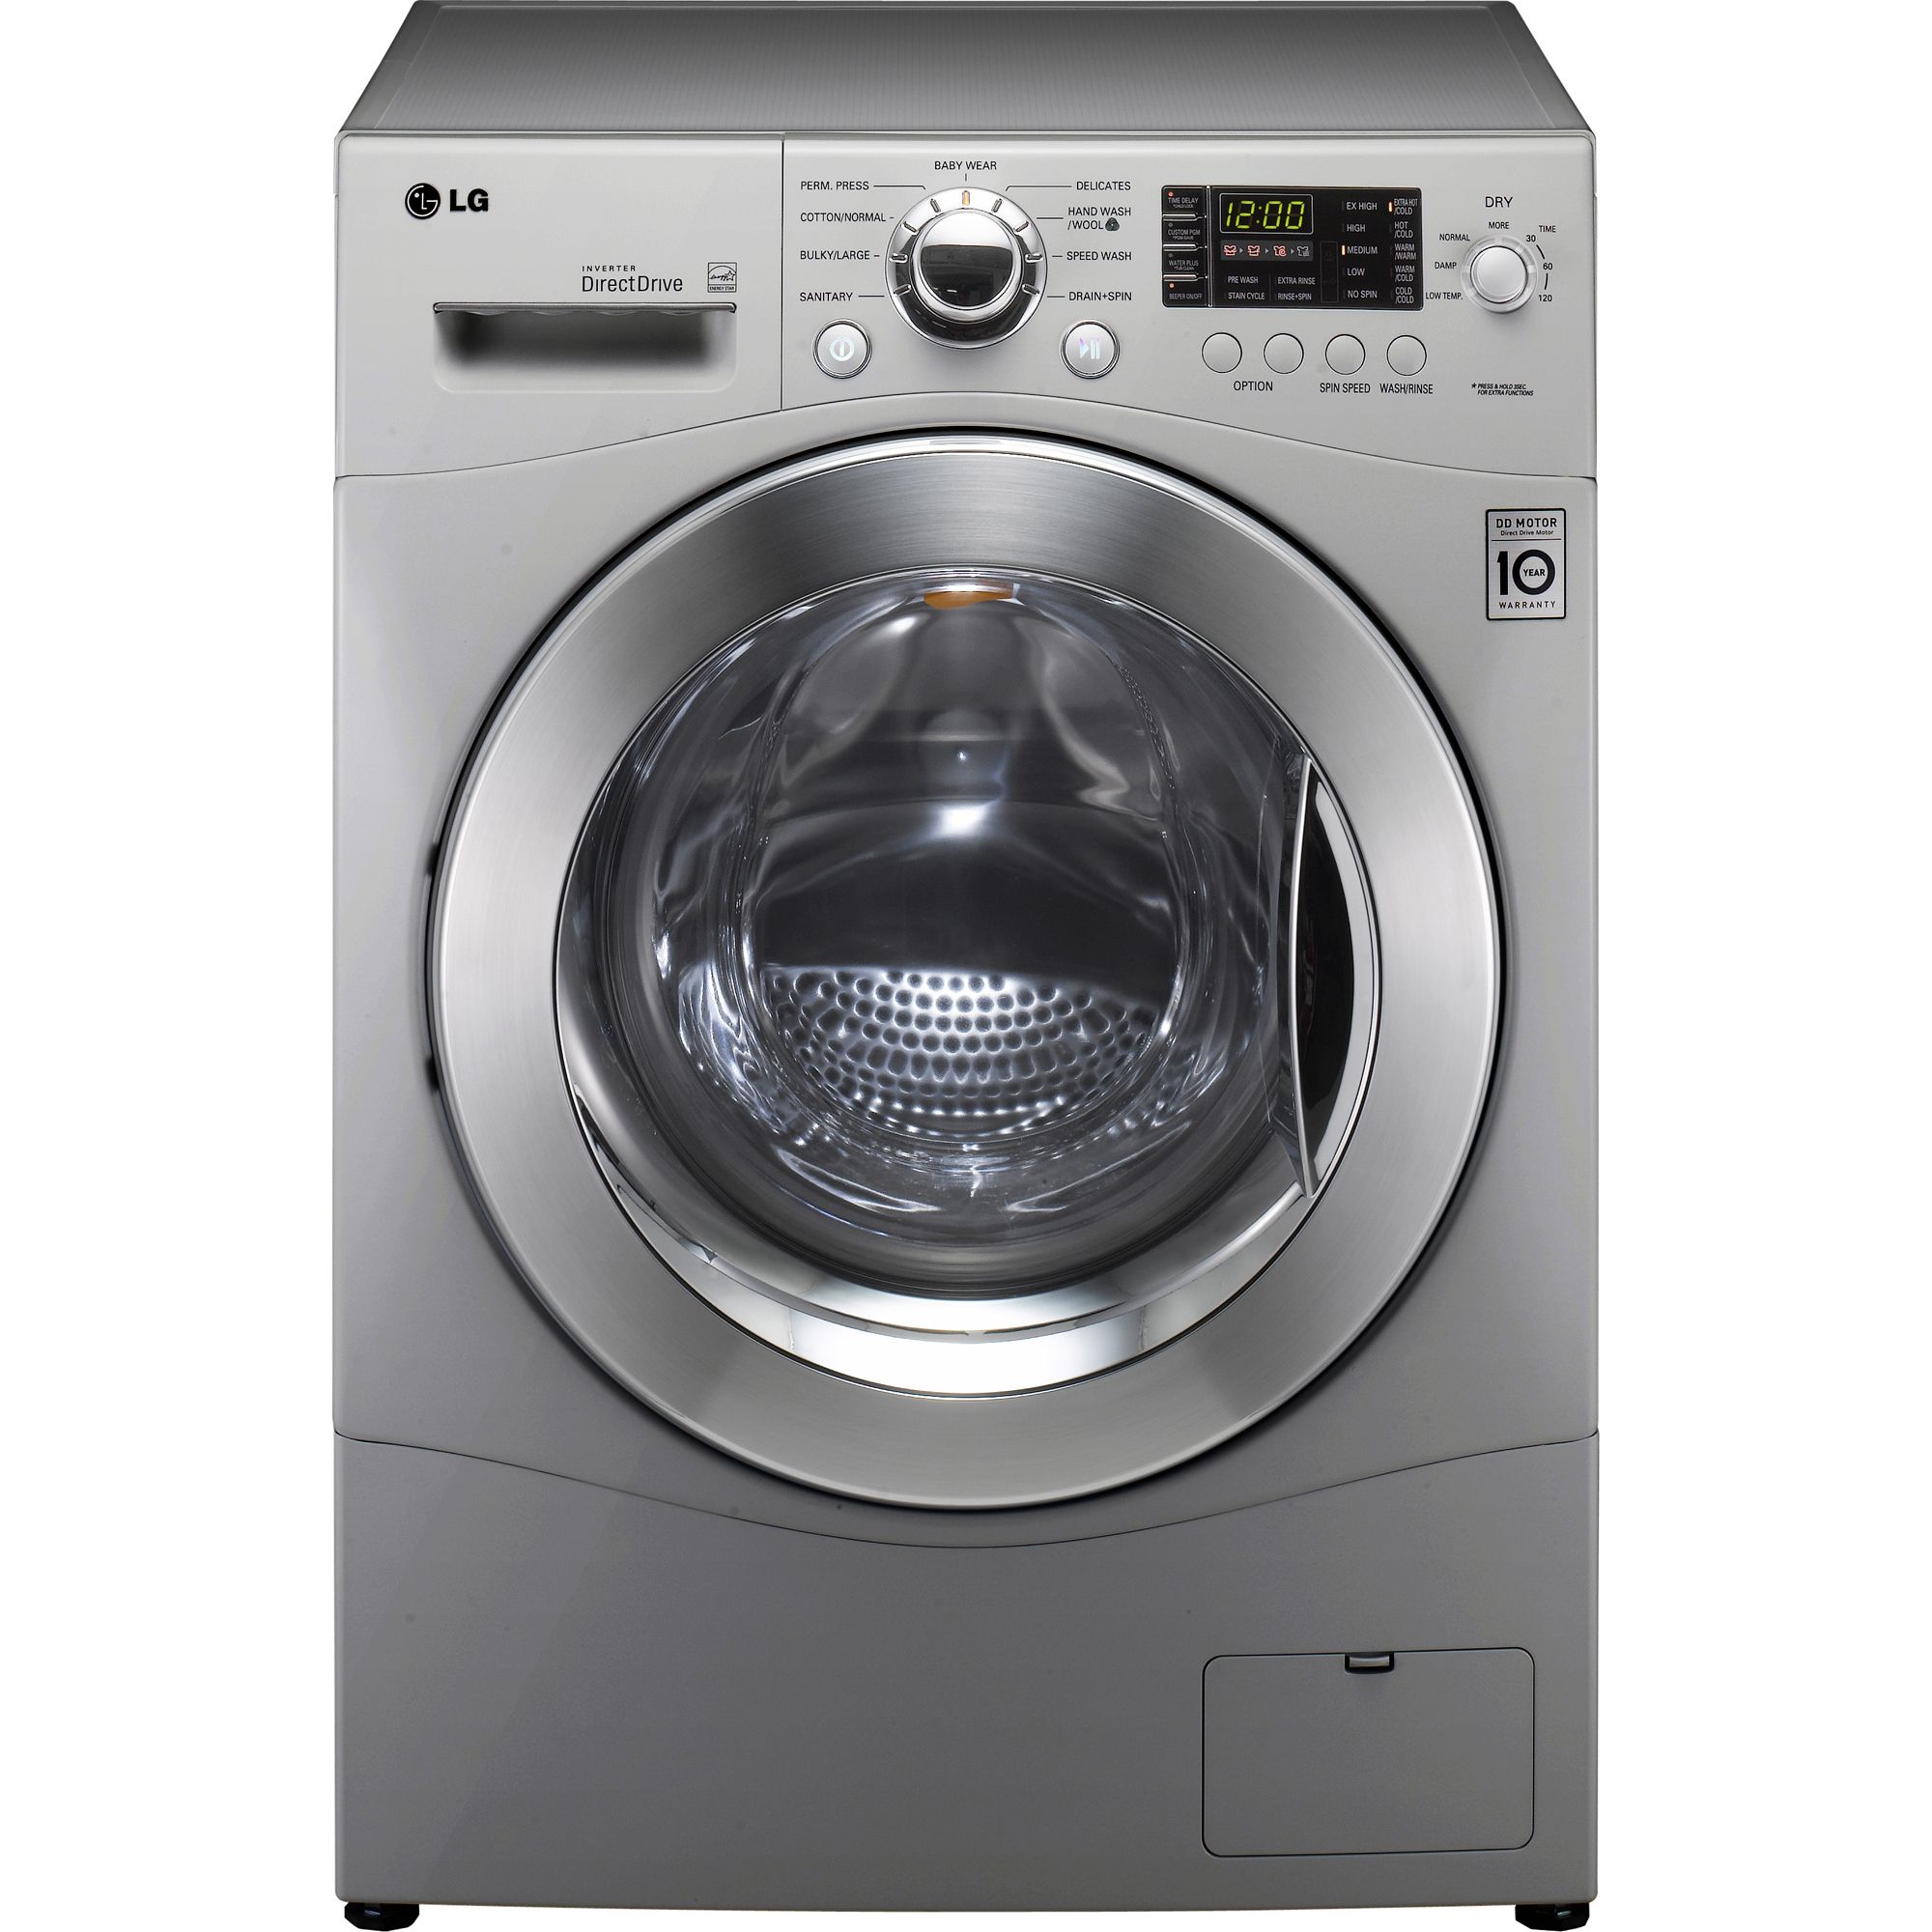 LG 2.3 cu. ft. All-in-One Washer and Dryer - Metallic